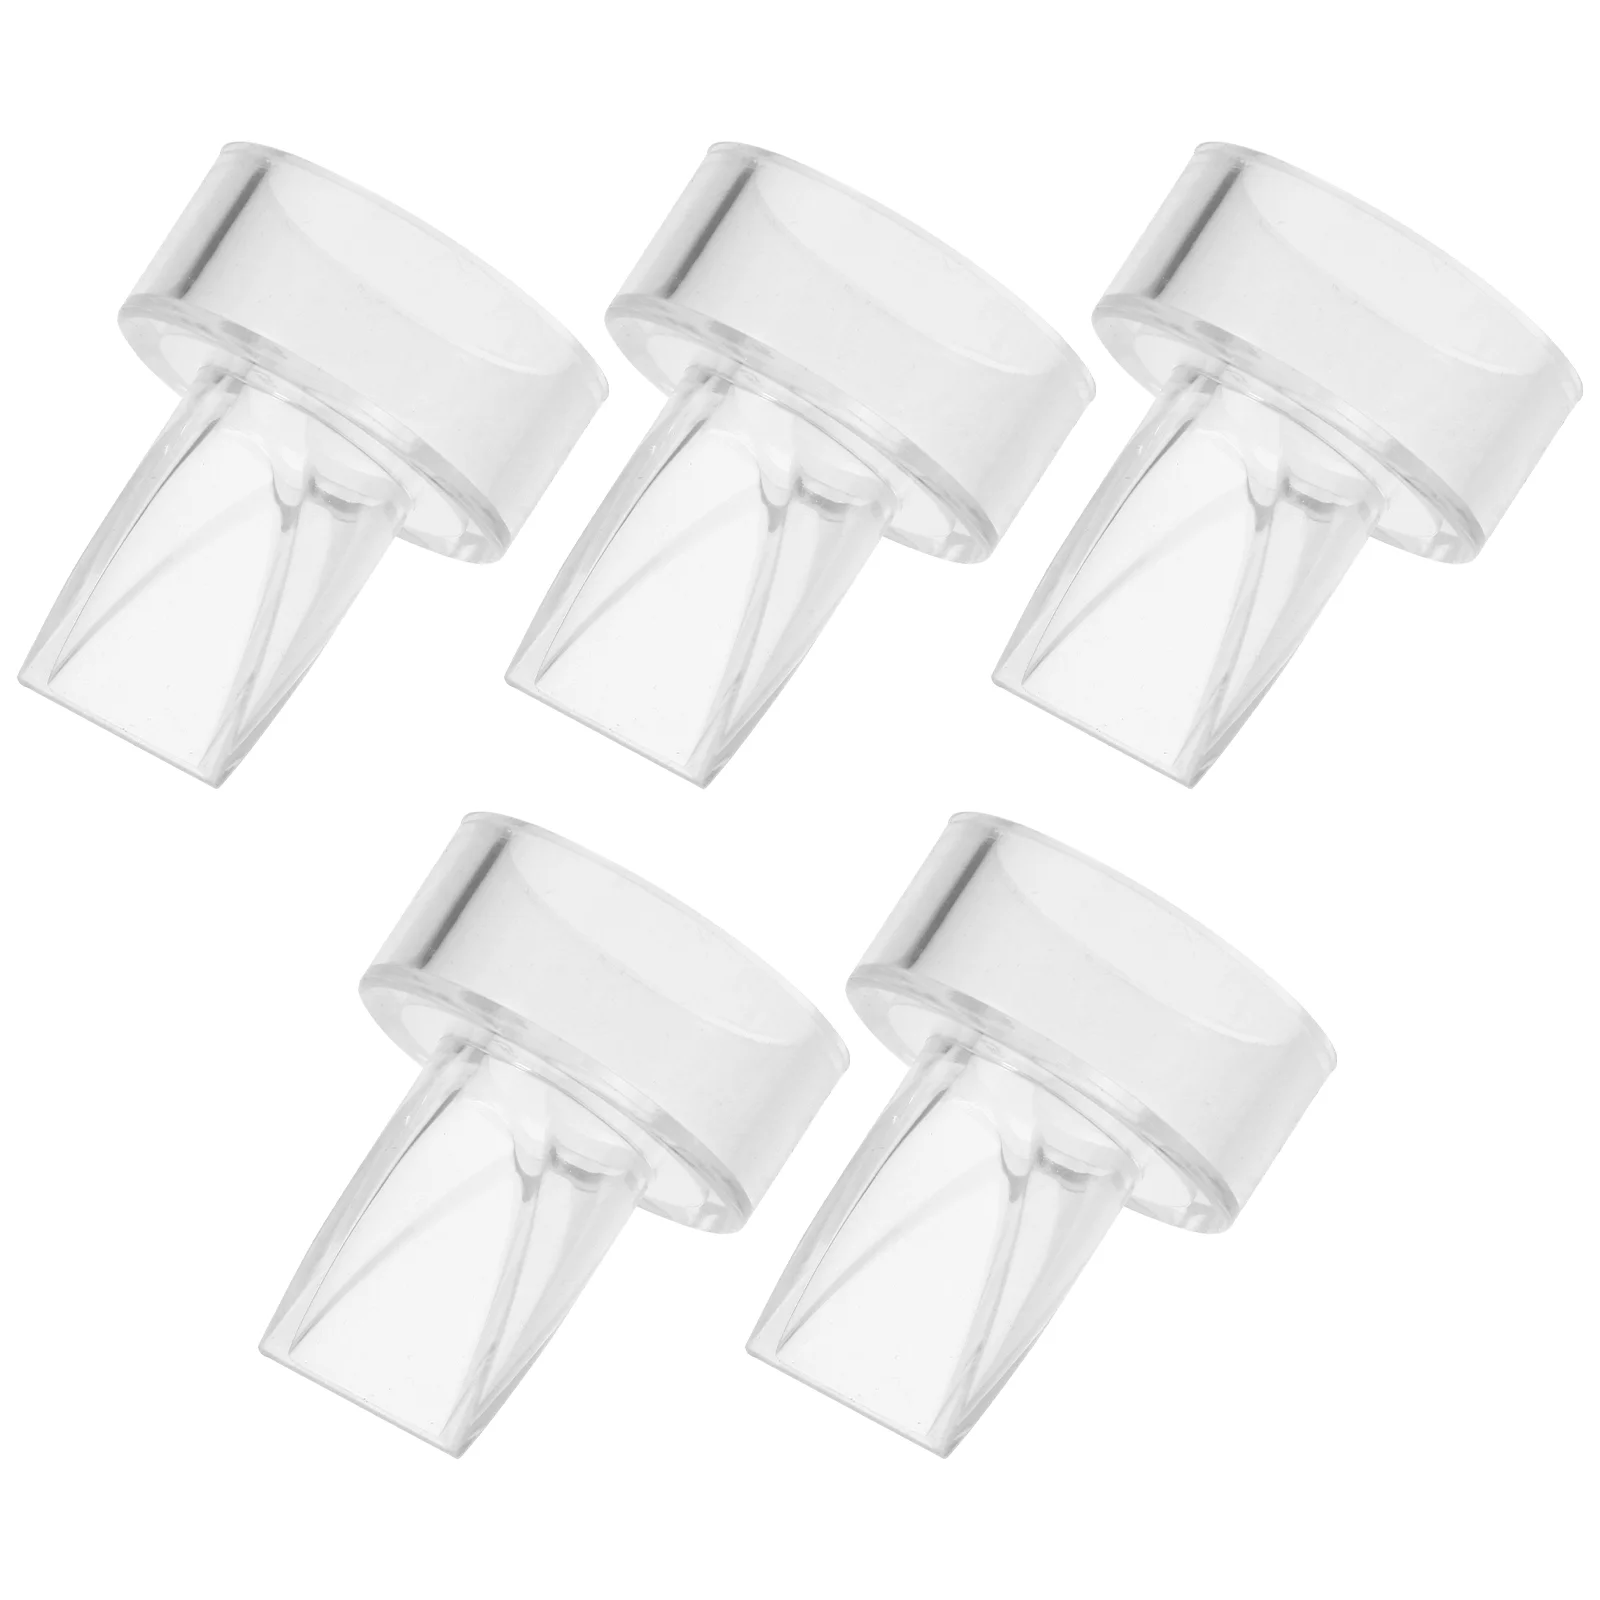 

5 Pcs Valve Baby Hands Free Parts for Silica Gel